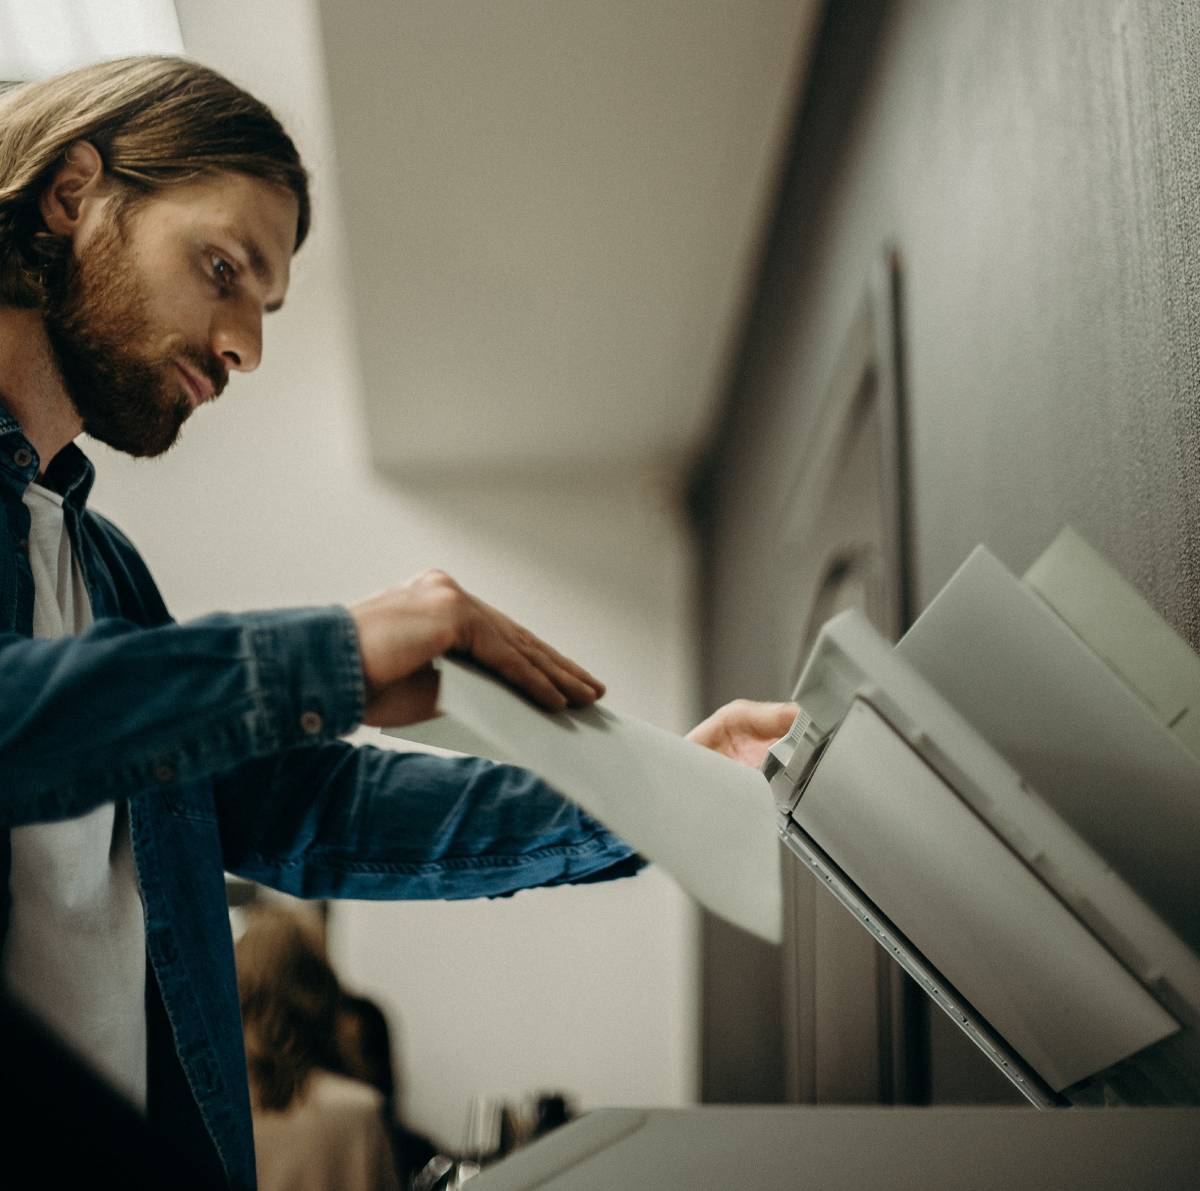 Business man putting documents into copier in an office setting.